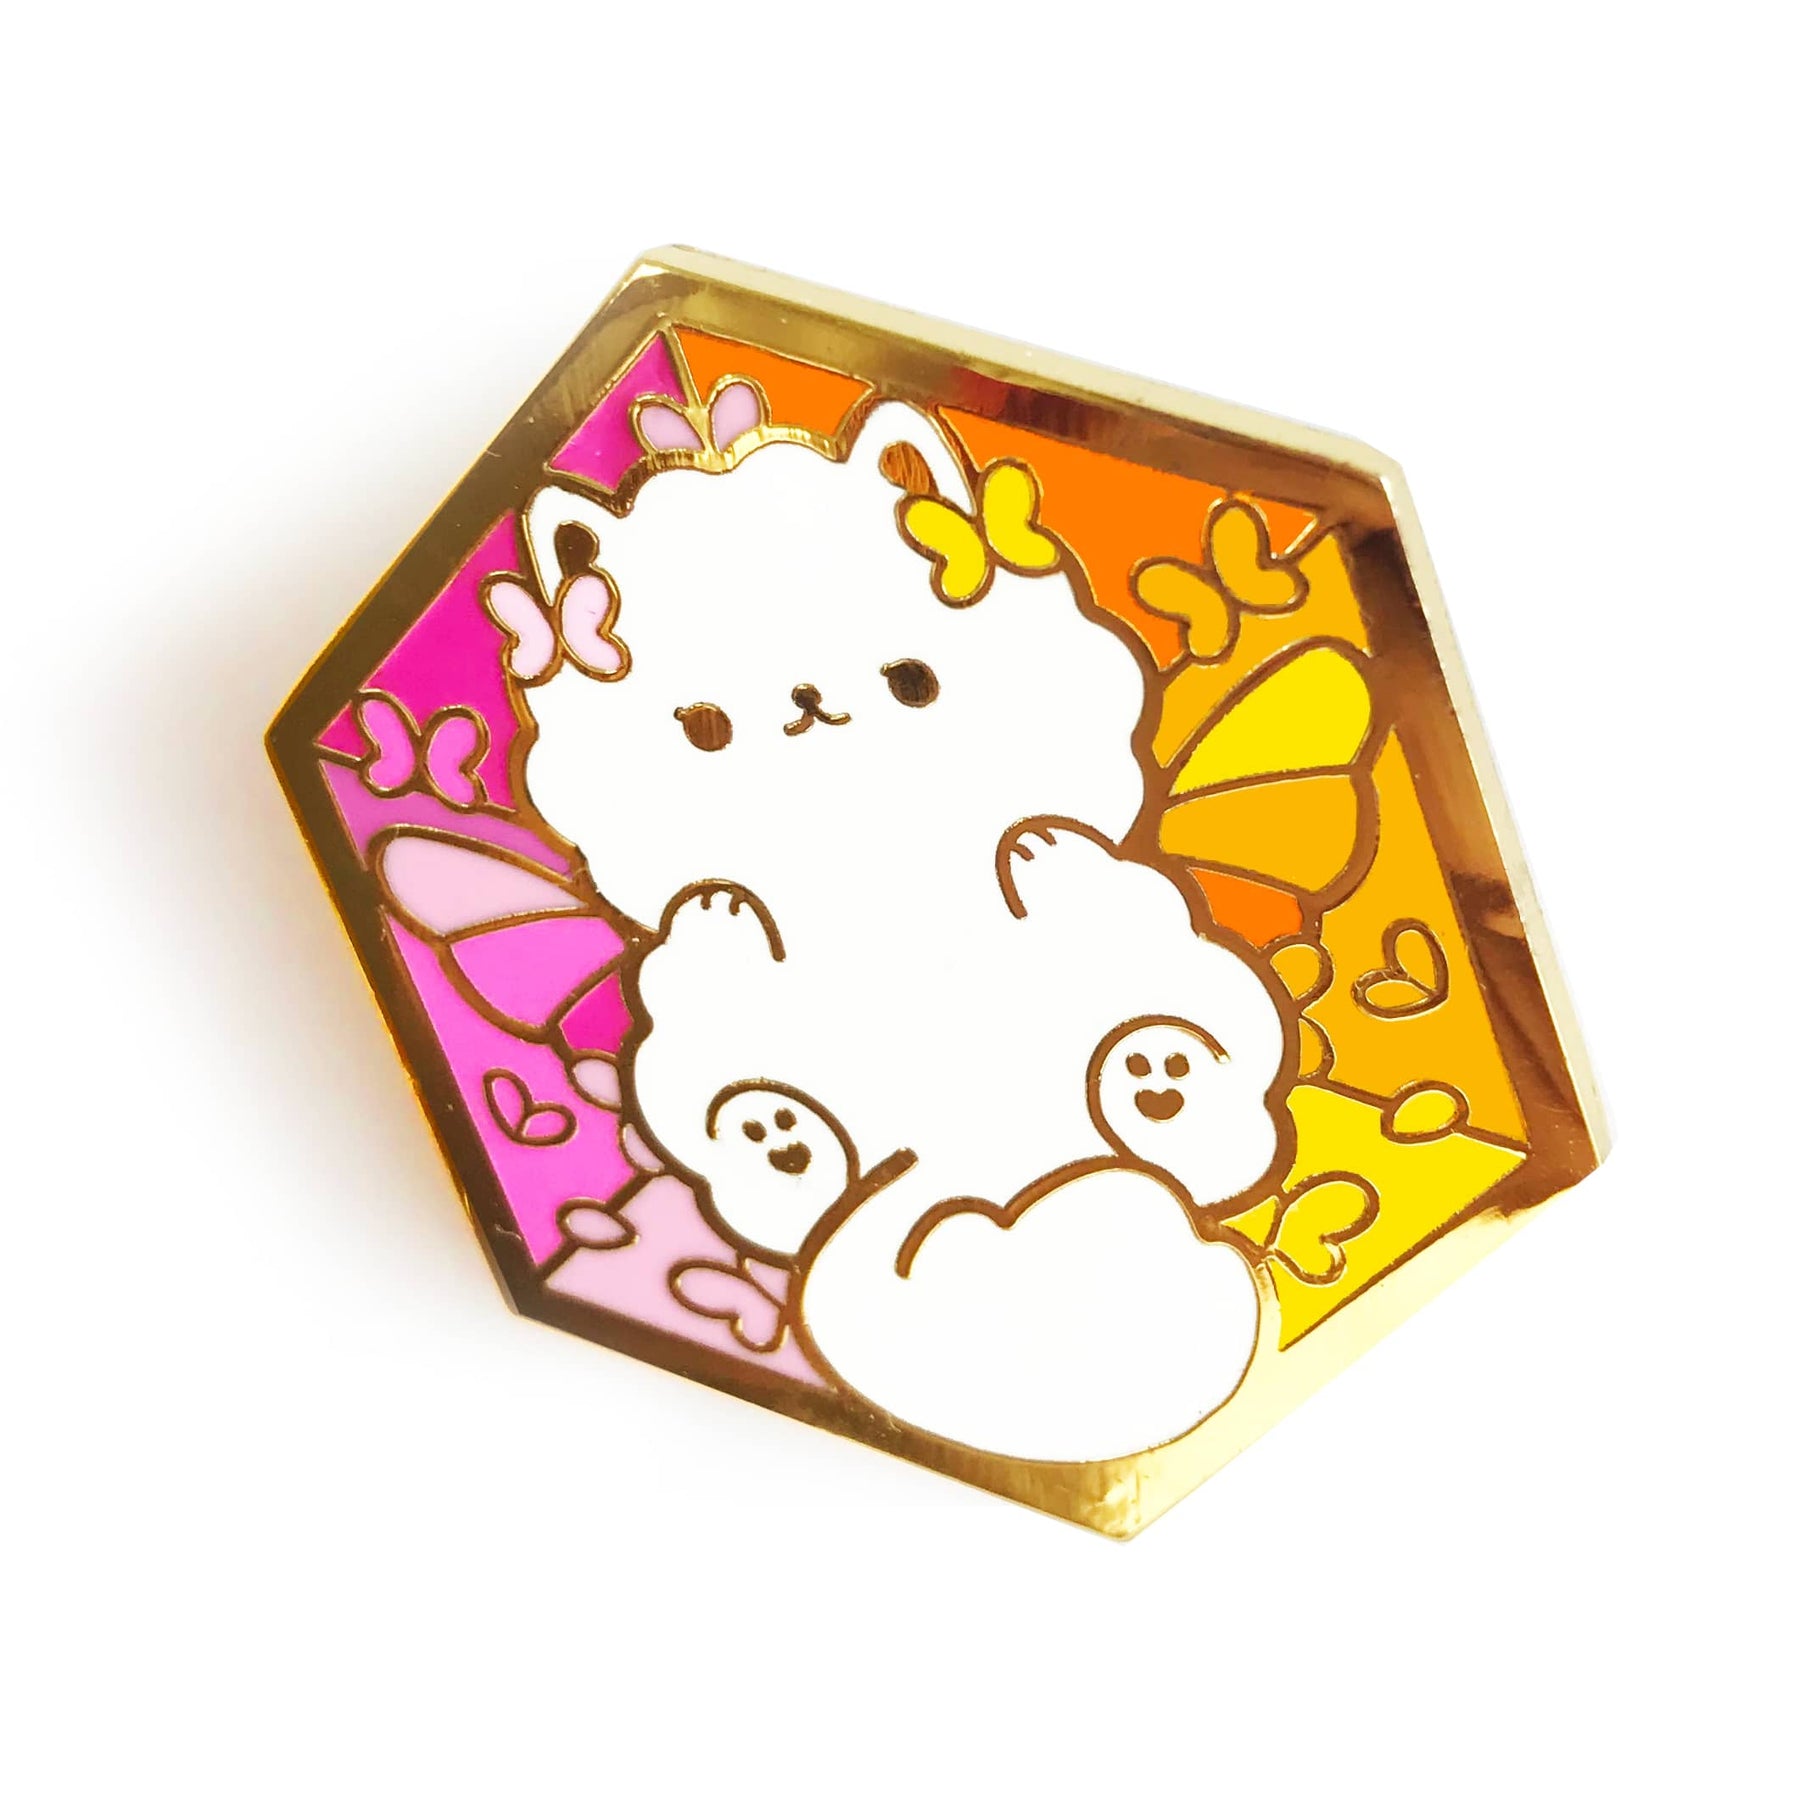 Paws Of Lesbian Pin Paws Of Pride